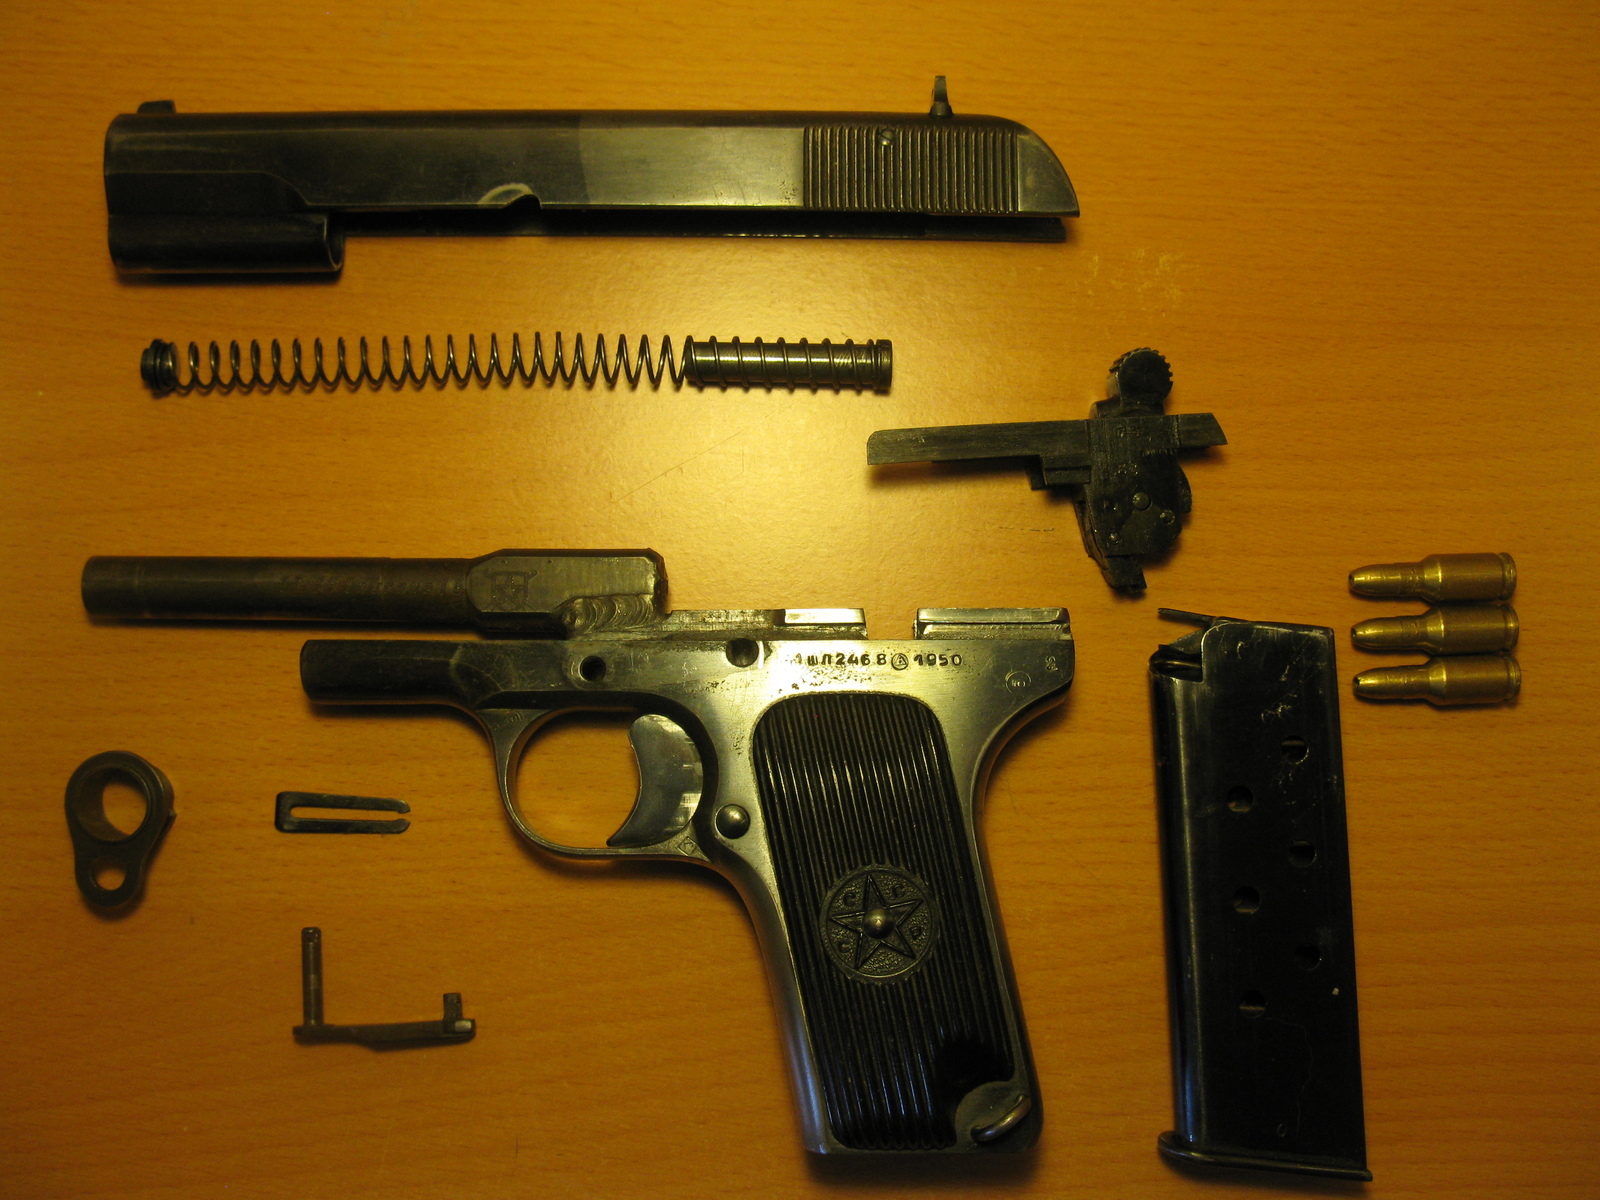 TT and Luger P08 - My, Pistols, Weapon, TT pistol, MMG, Dummy, Short-barreled, Luger, Army, Longpost